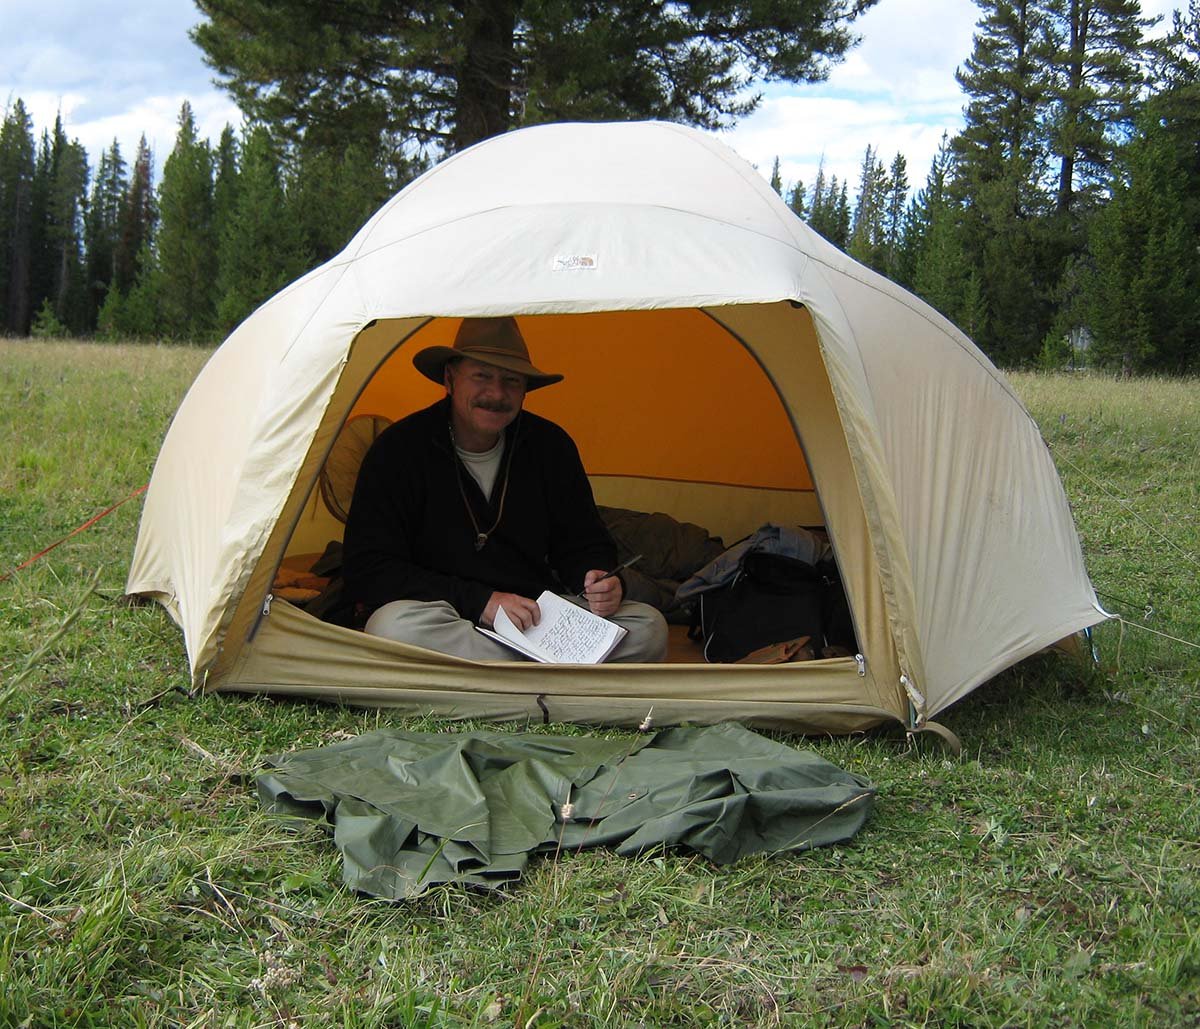 Chuck taking advantage of a quiet moment in camp to update his trip journal.